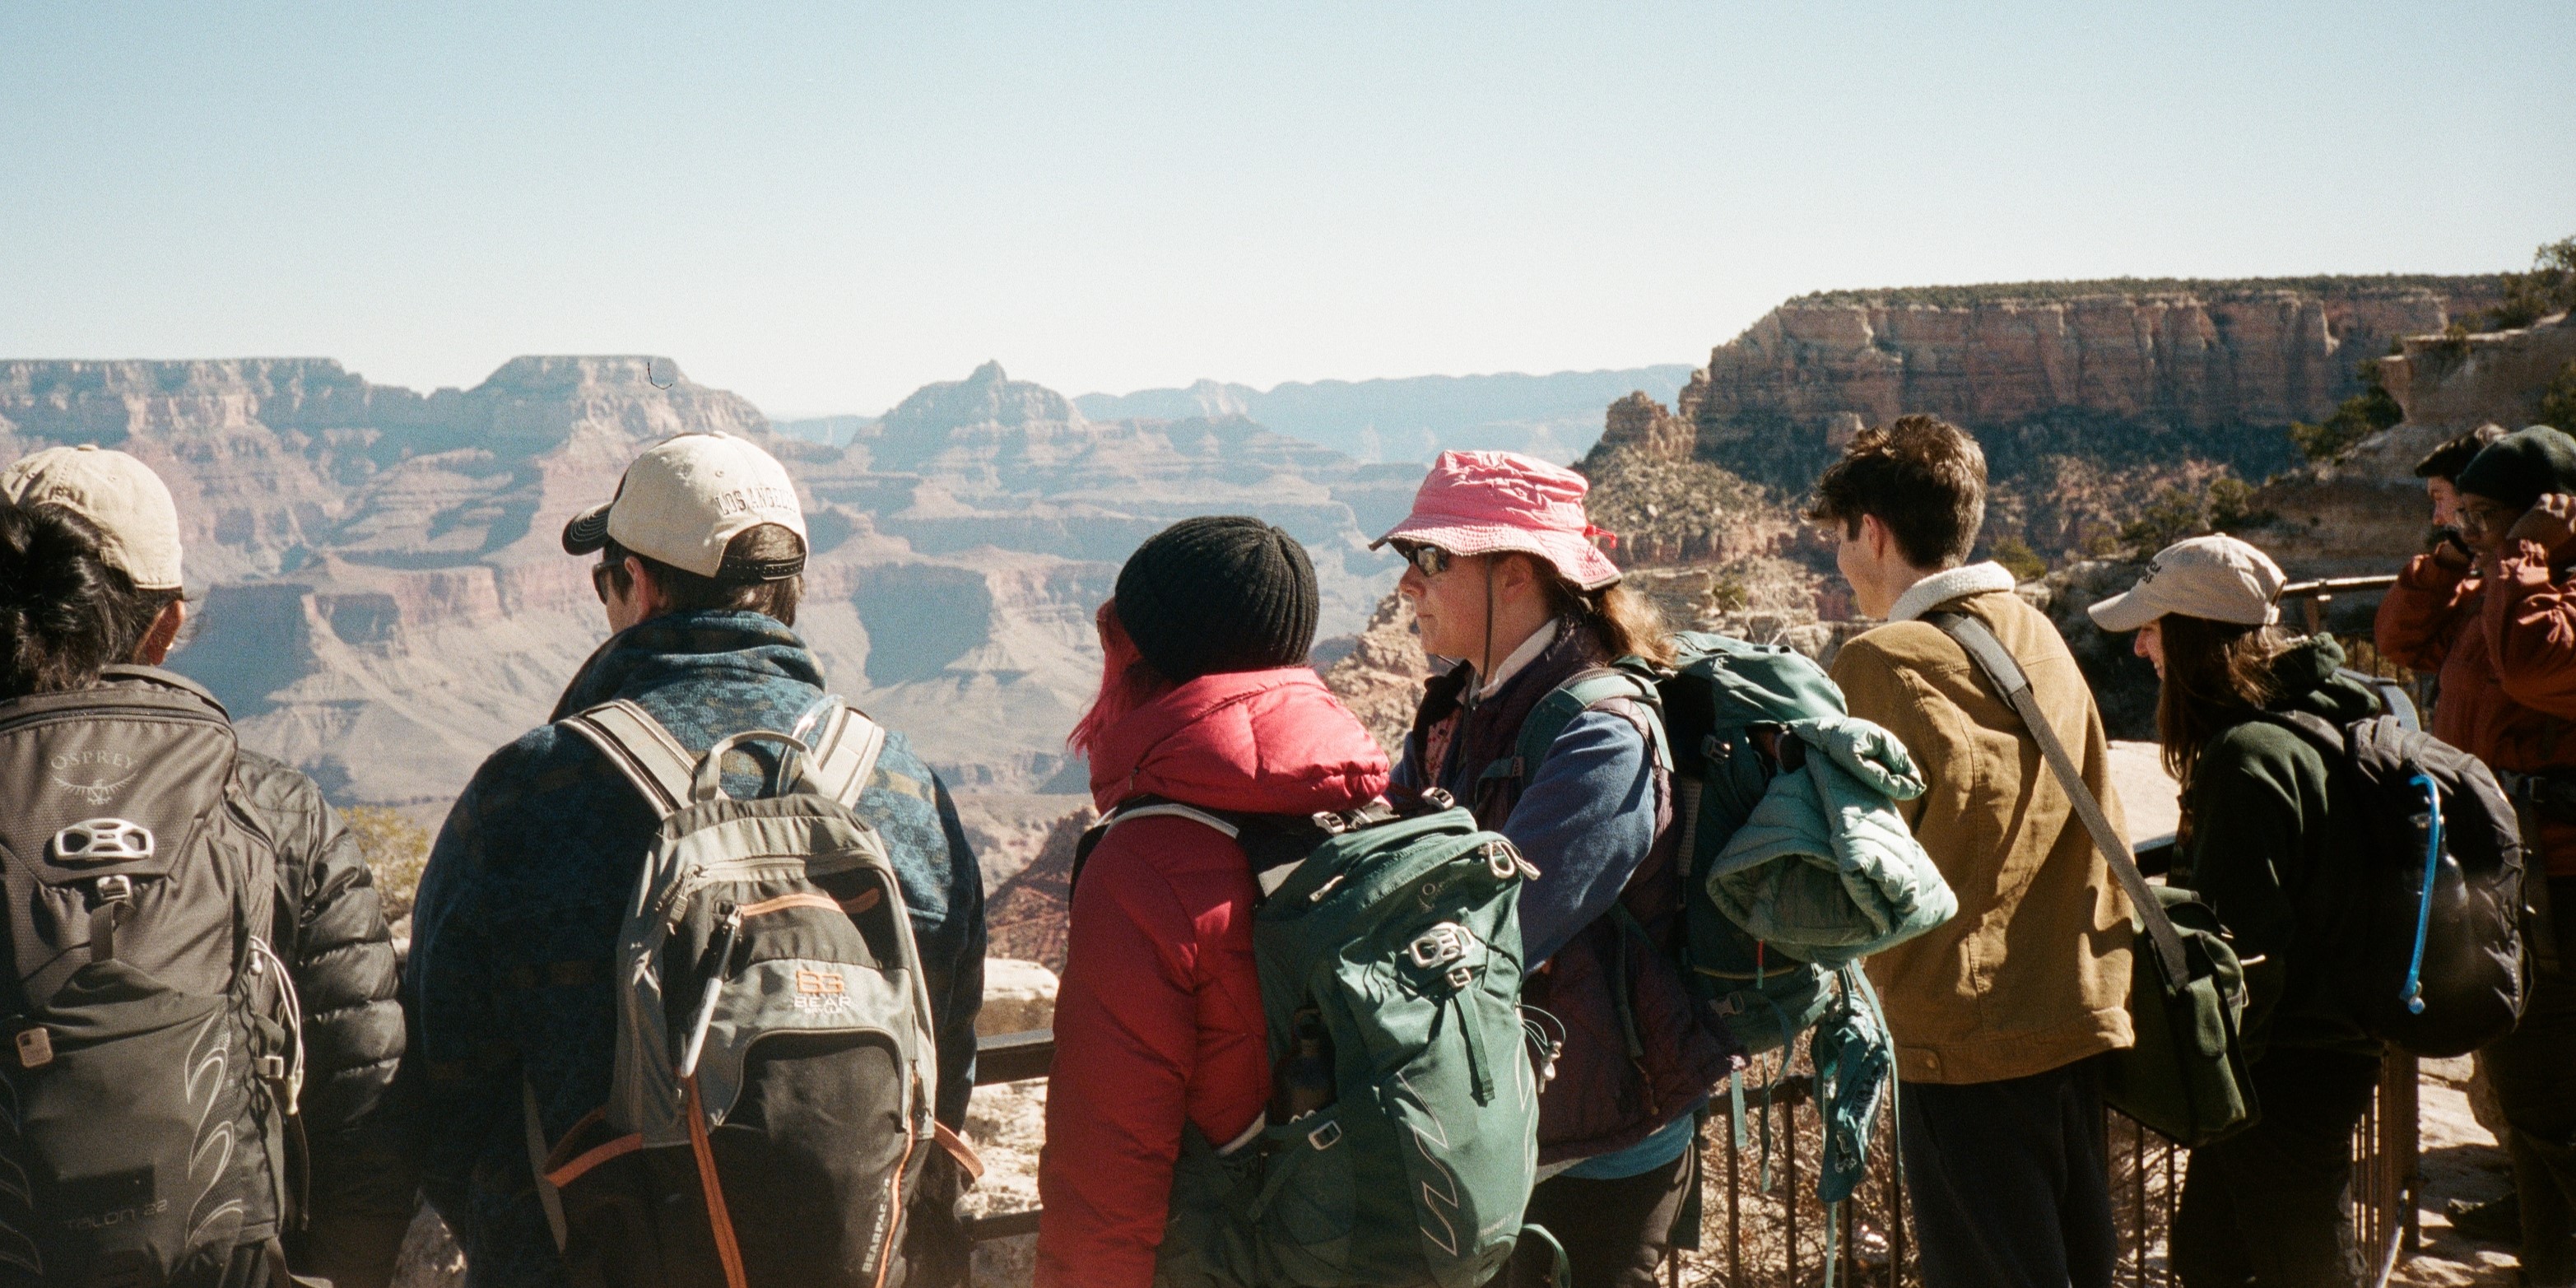 EPSS Students on a field trip look out over the Grand Canyon